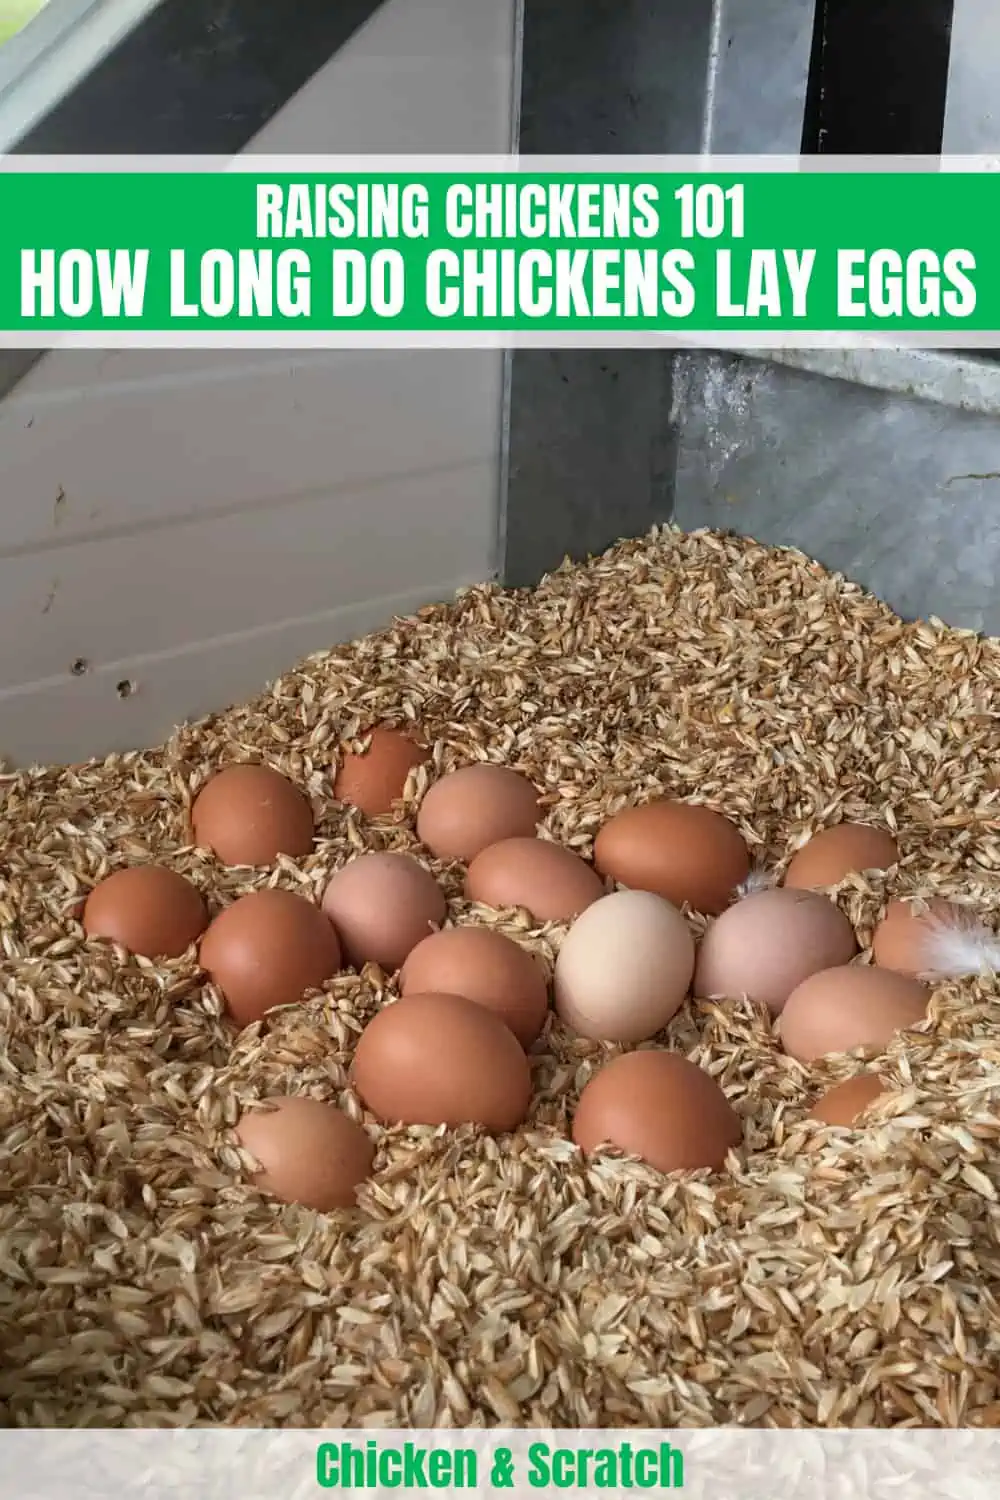 How Long Do Chickens Lay Eggs